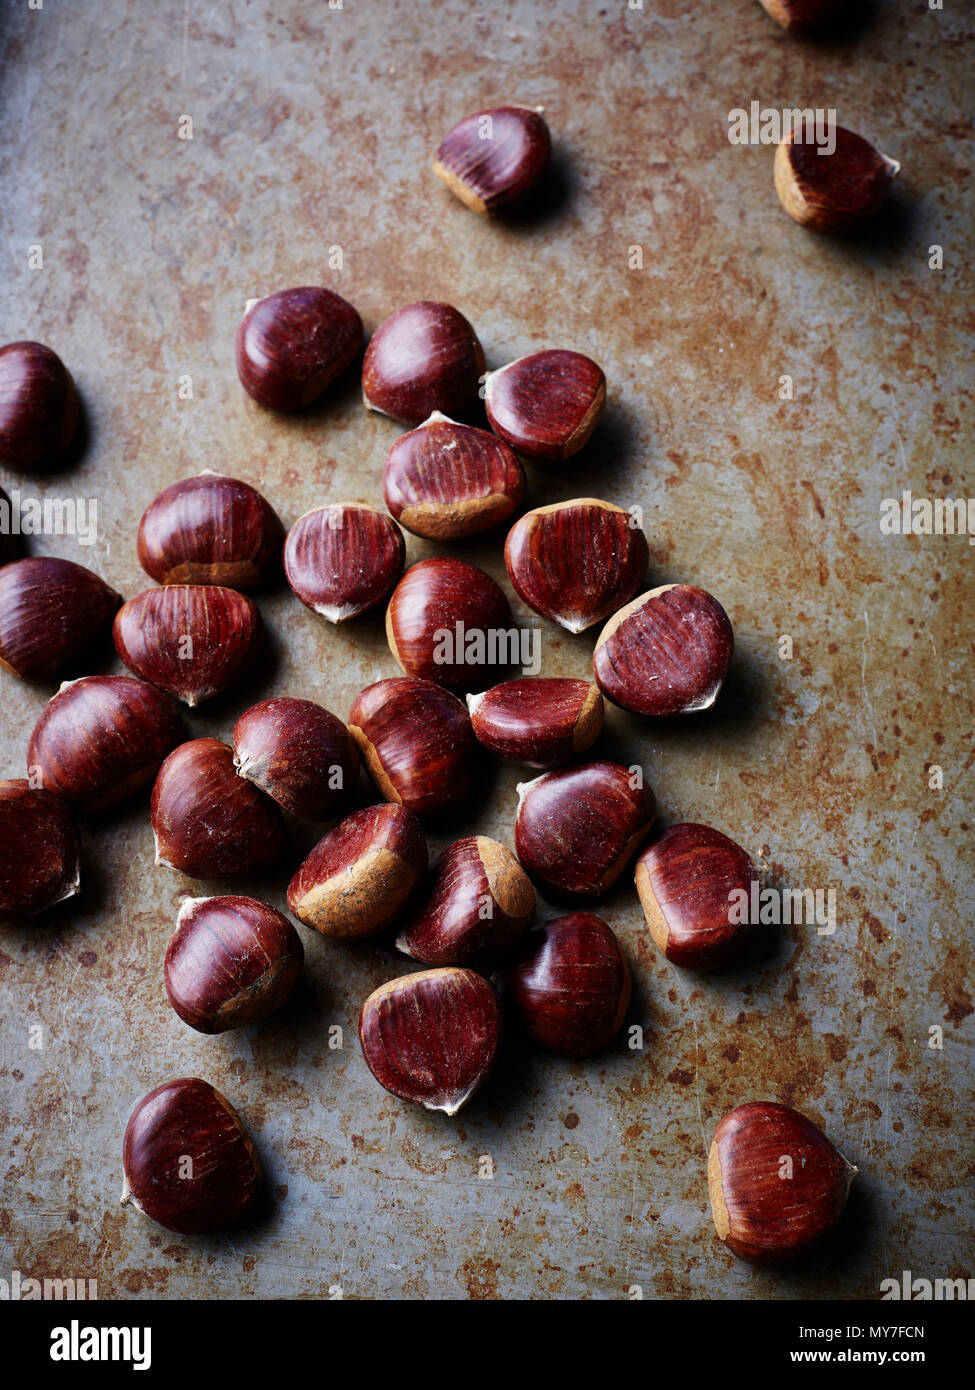 Chestnuts on rustic surface, close-up Stock Photo